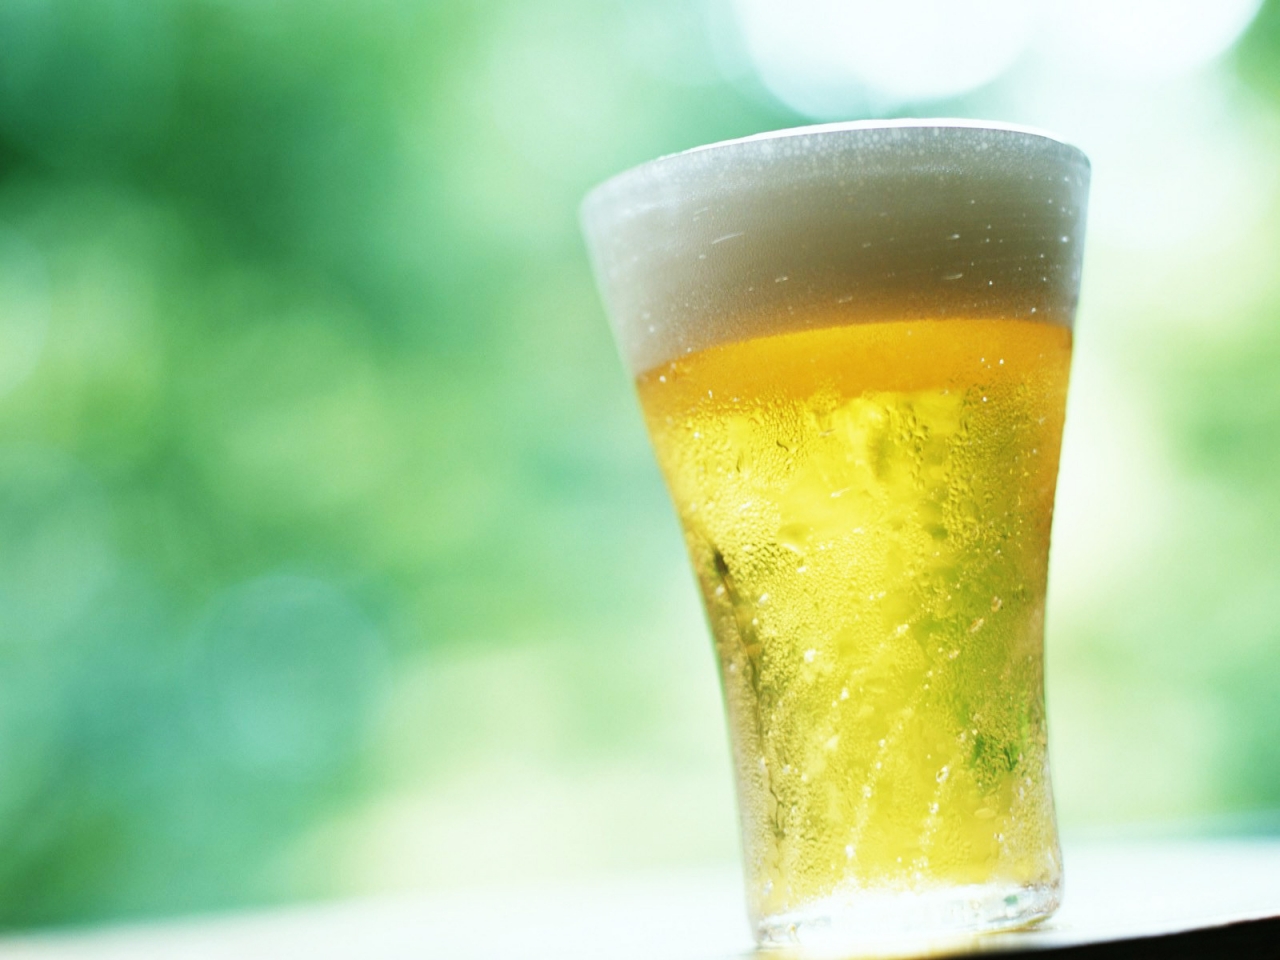 Cold Glass of Beer hd wallpaper for 1280 x 960 resolution